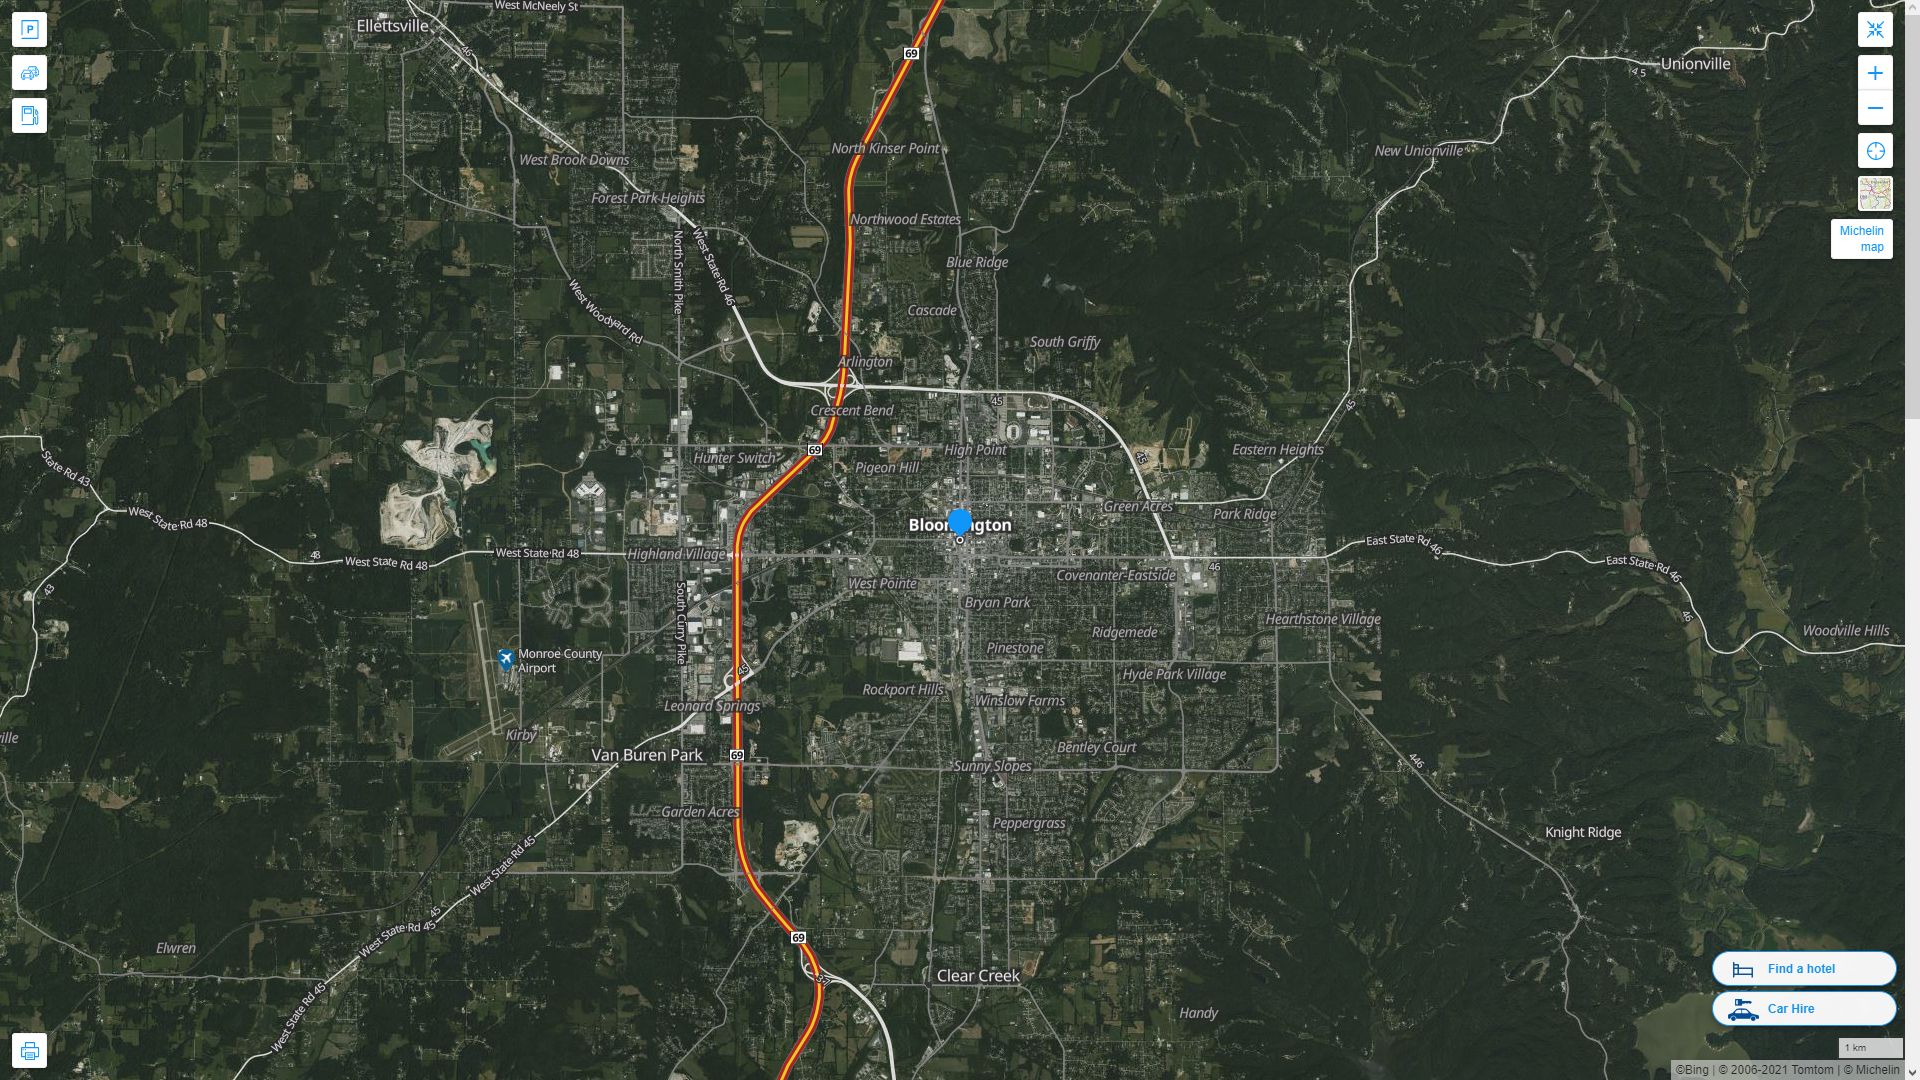 Bloomington Indiana Highway and Road Map with Satellite View